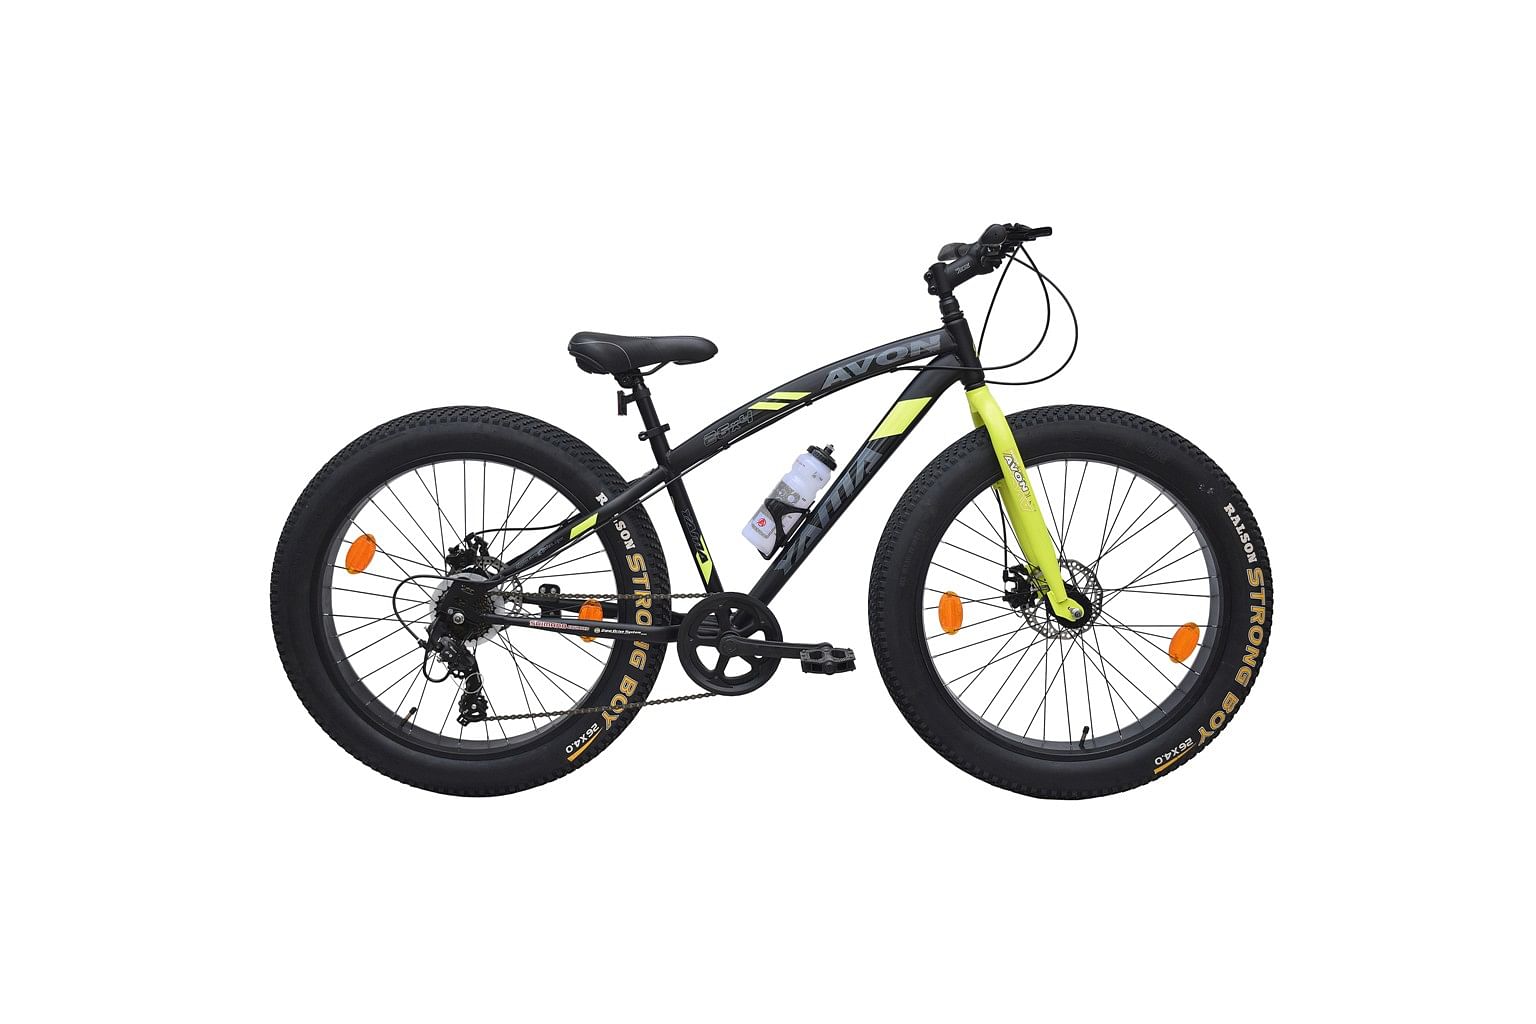 Avon YAMA 21 SPEED - WITH SUSPENSION FORK ( FAT BIKE) cycle